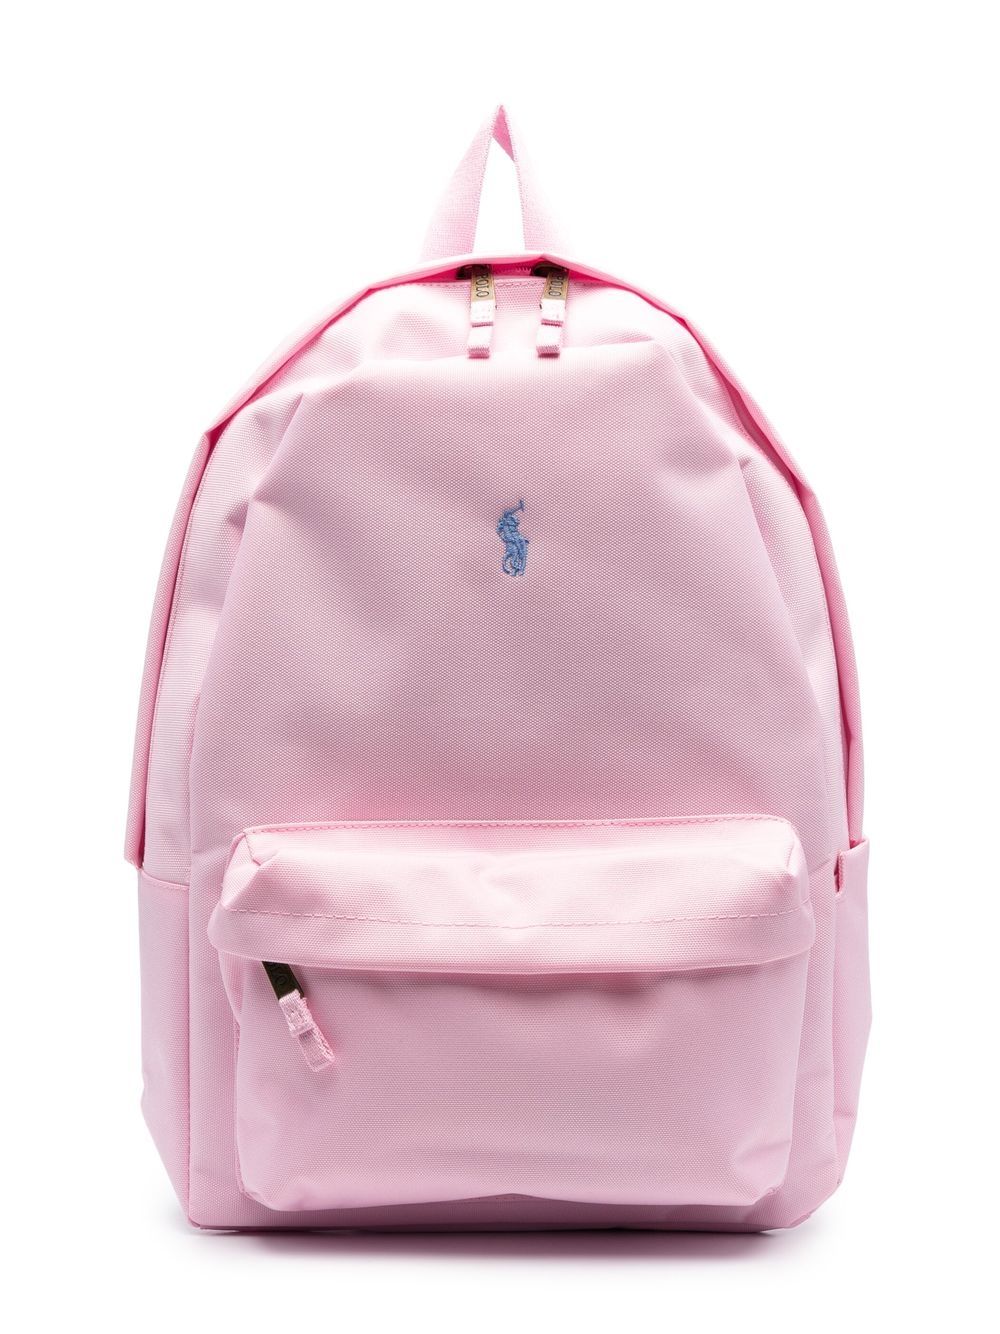 Ralph Lauren Childrenswear Kids Polo Color Backpack, Pink